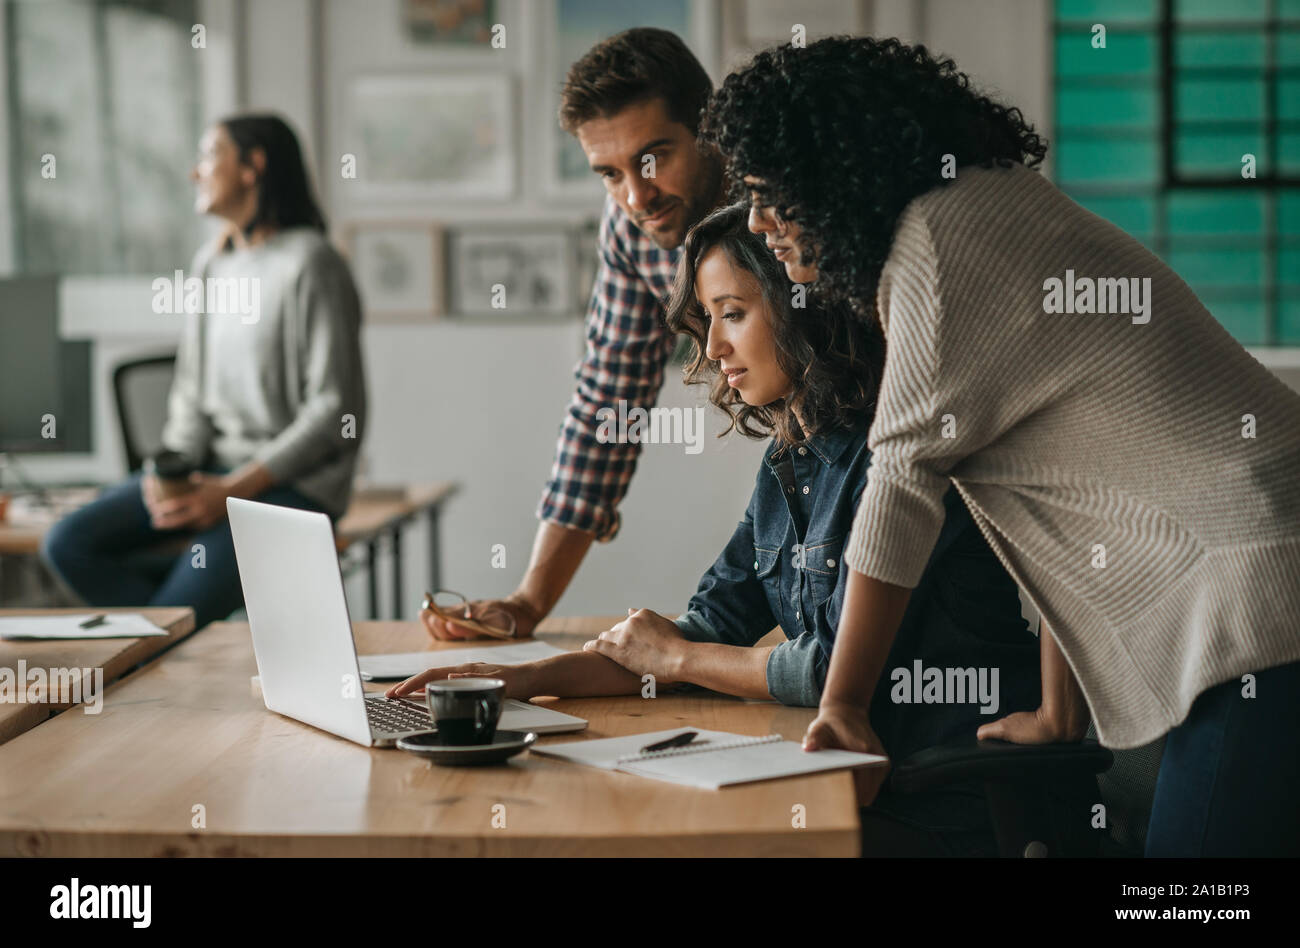 Diverse group of designers working together on an office laptop Stock Photo